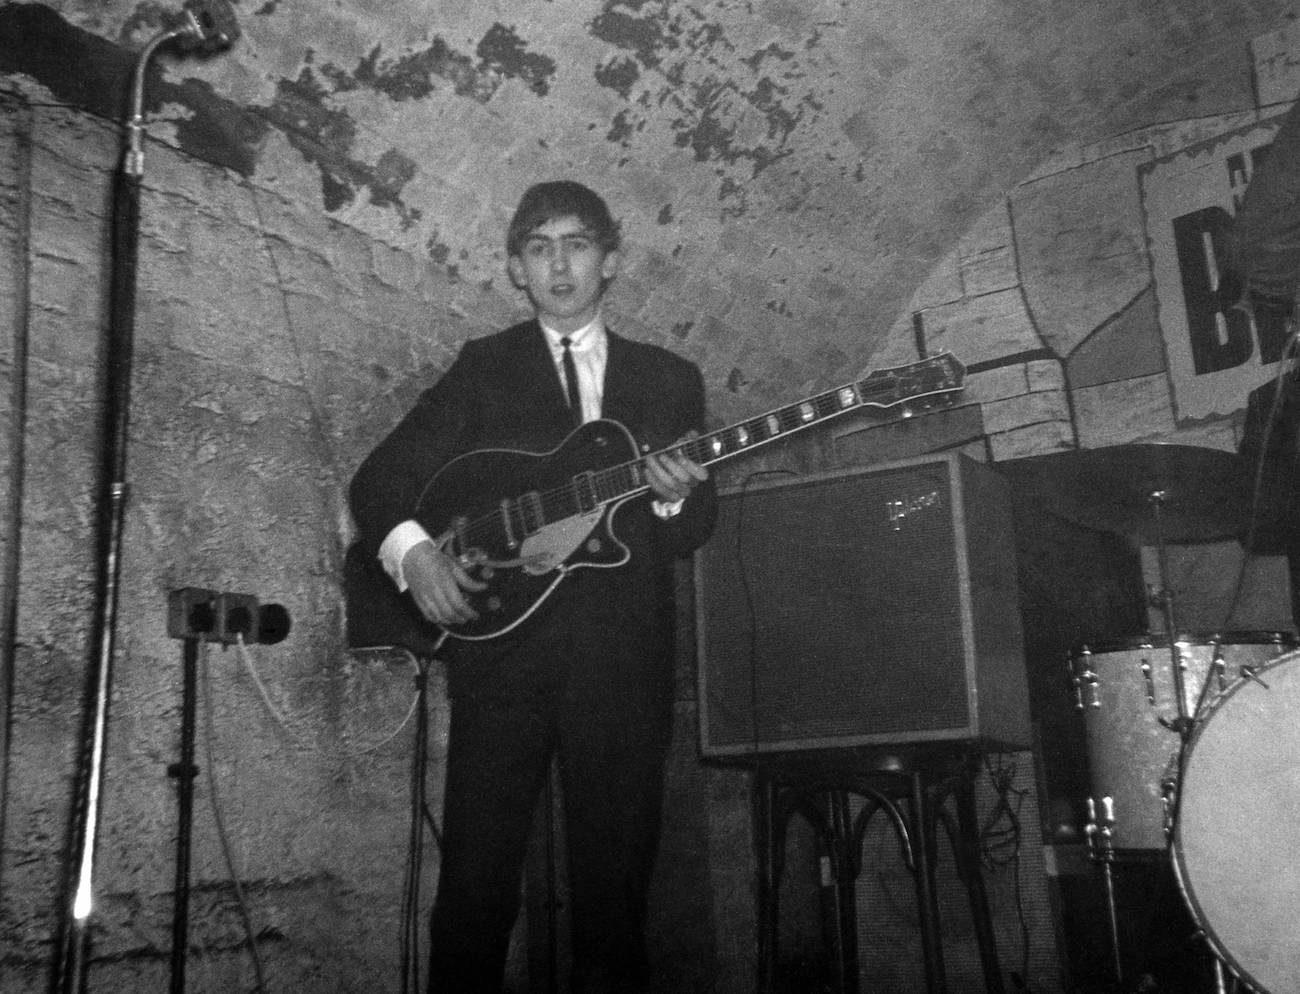 George Harrison with The Beatles at the Cavern Club.